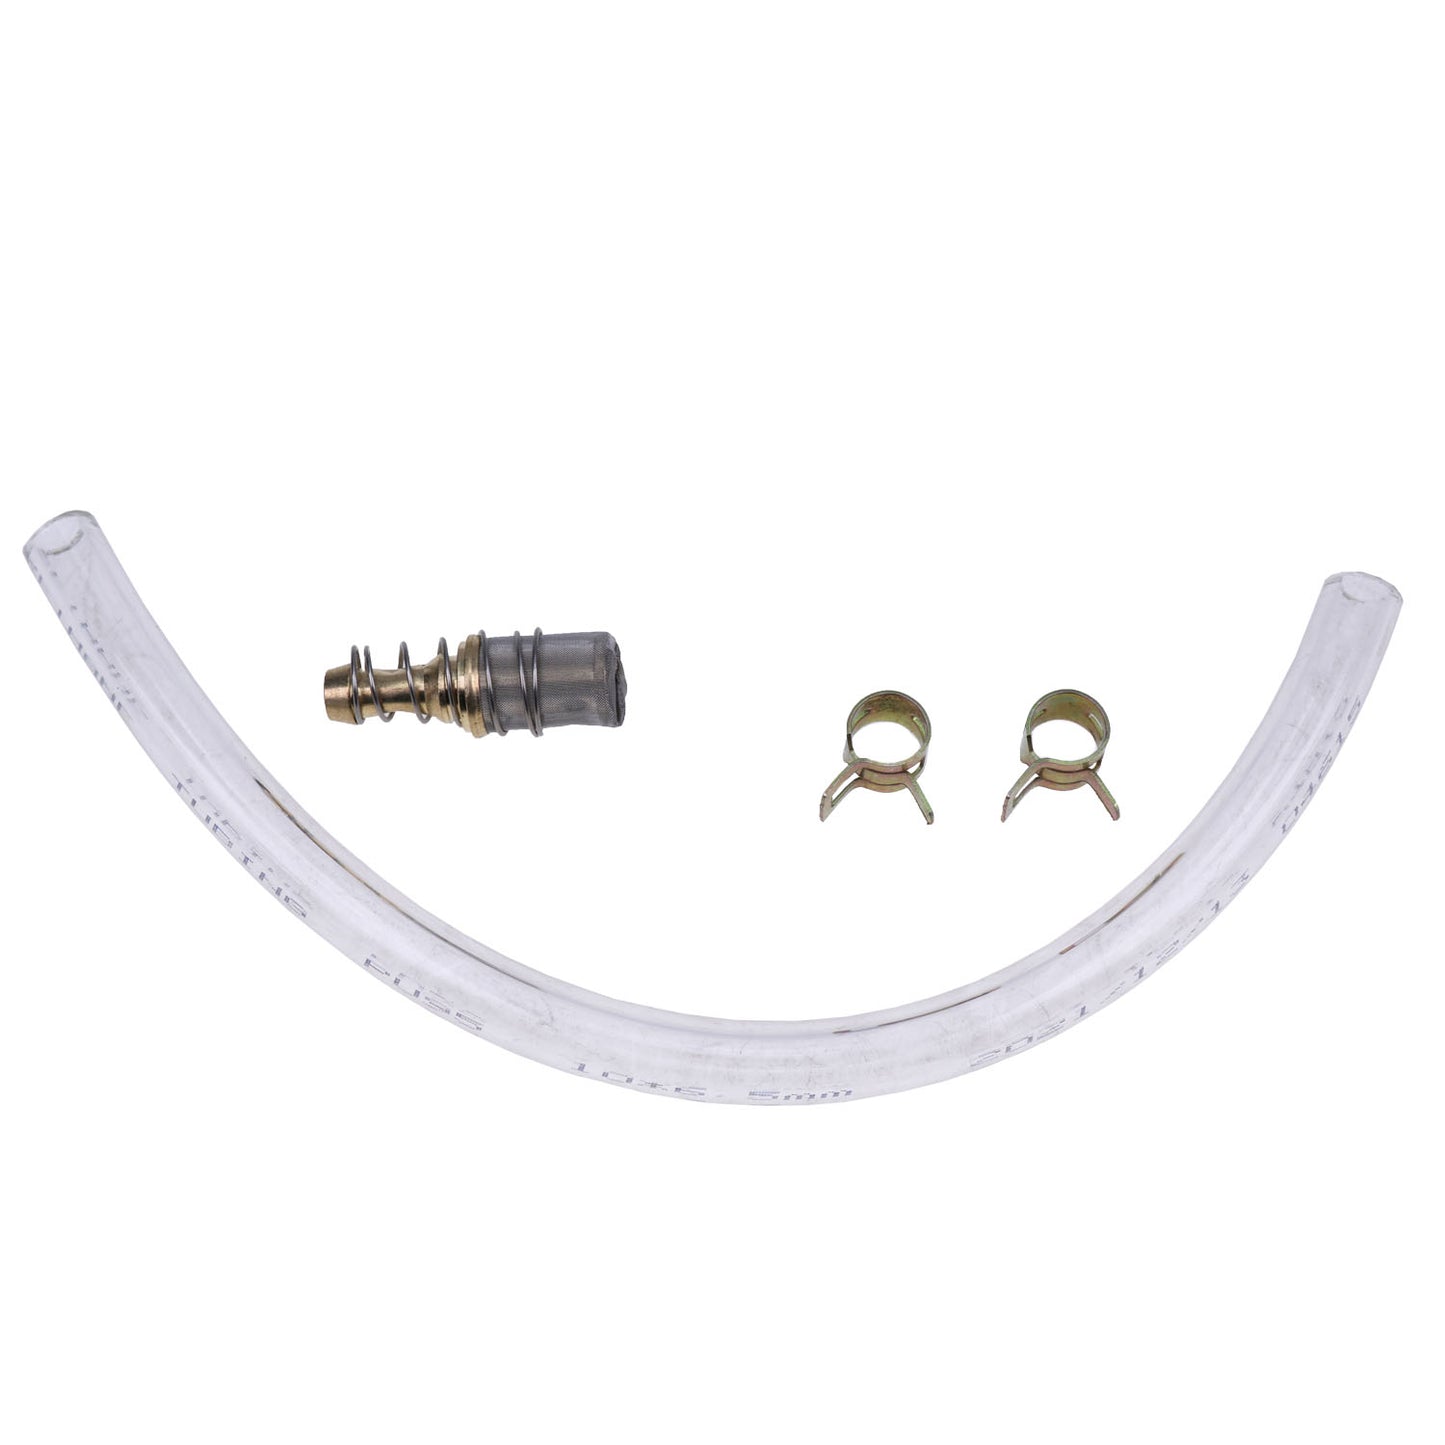 New 6650239 Fuel Tank Pickup Screen Kit with Hose & Clamp Compatible with Bobcat 751 753 763 773 7753 853 863 864 873 T200 943 953 641 642 643 645 653 741 742 743 Skid Steer Hose Diesel